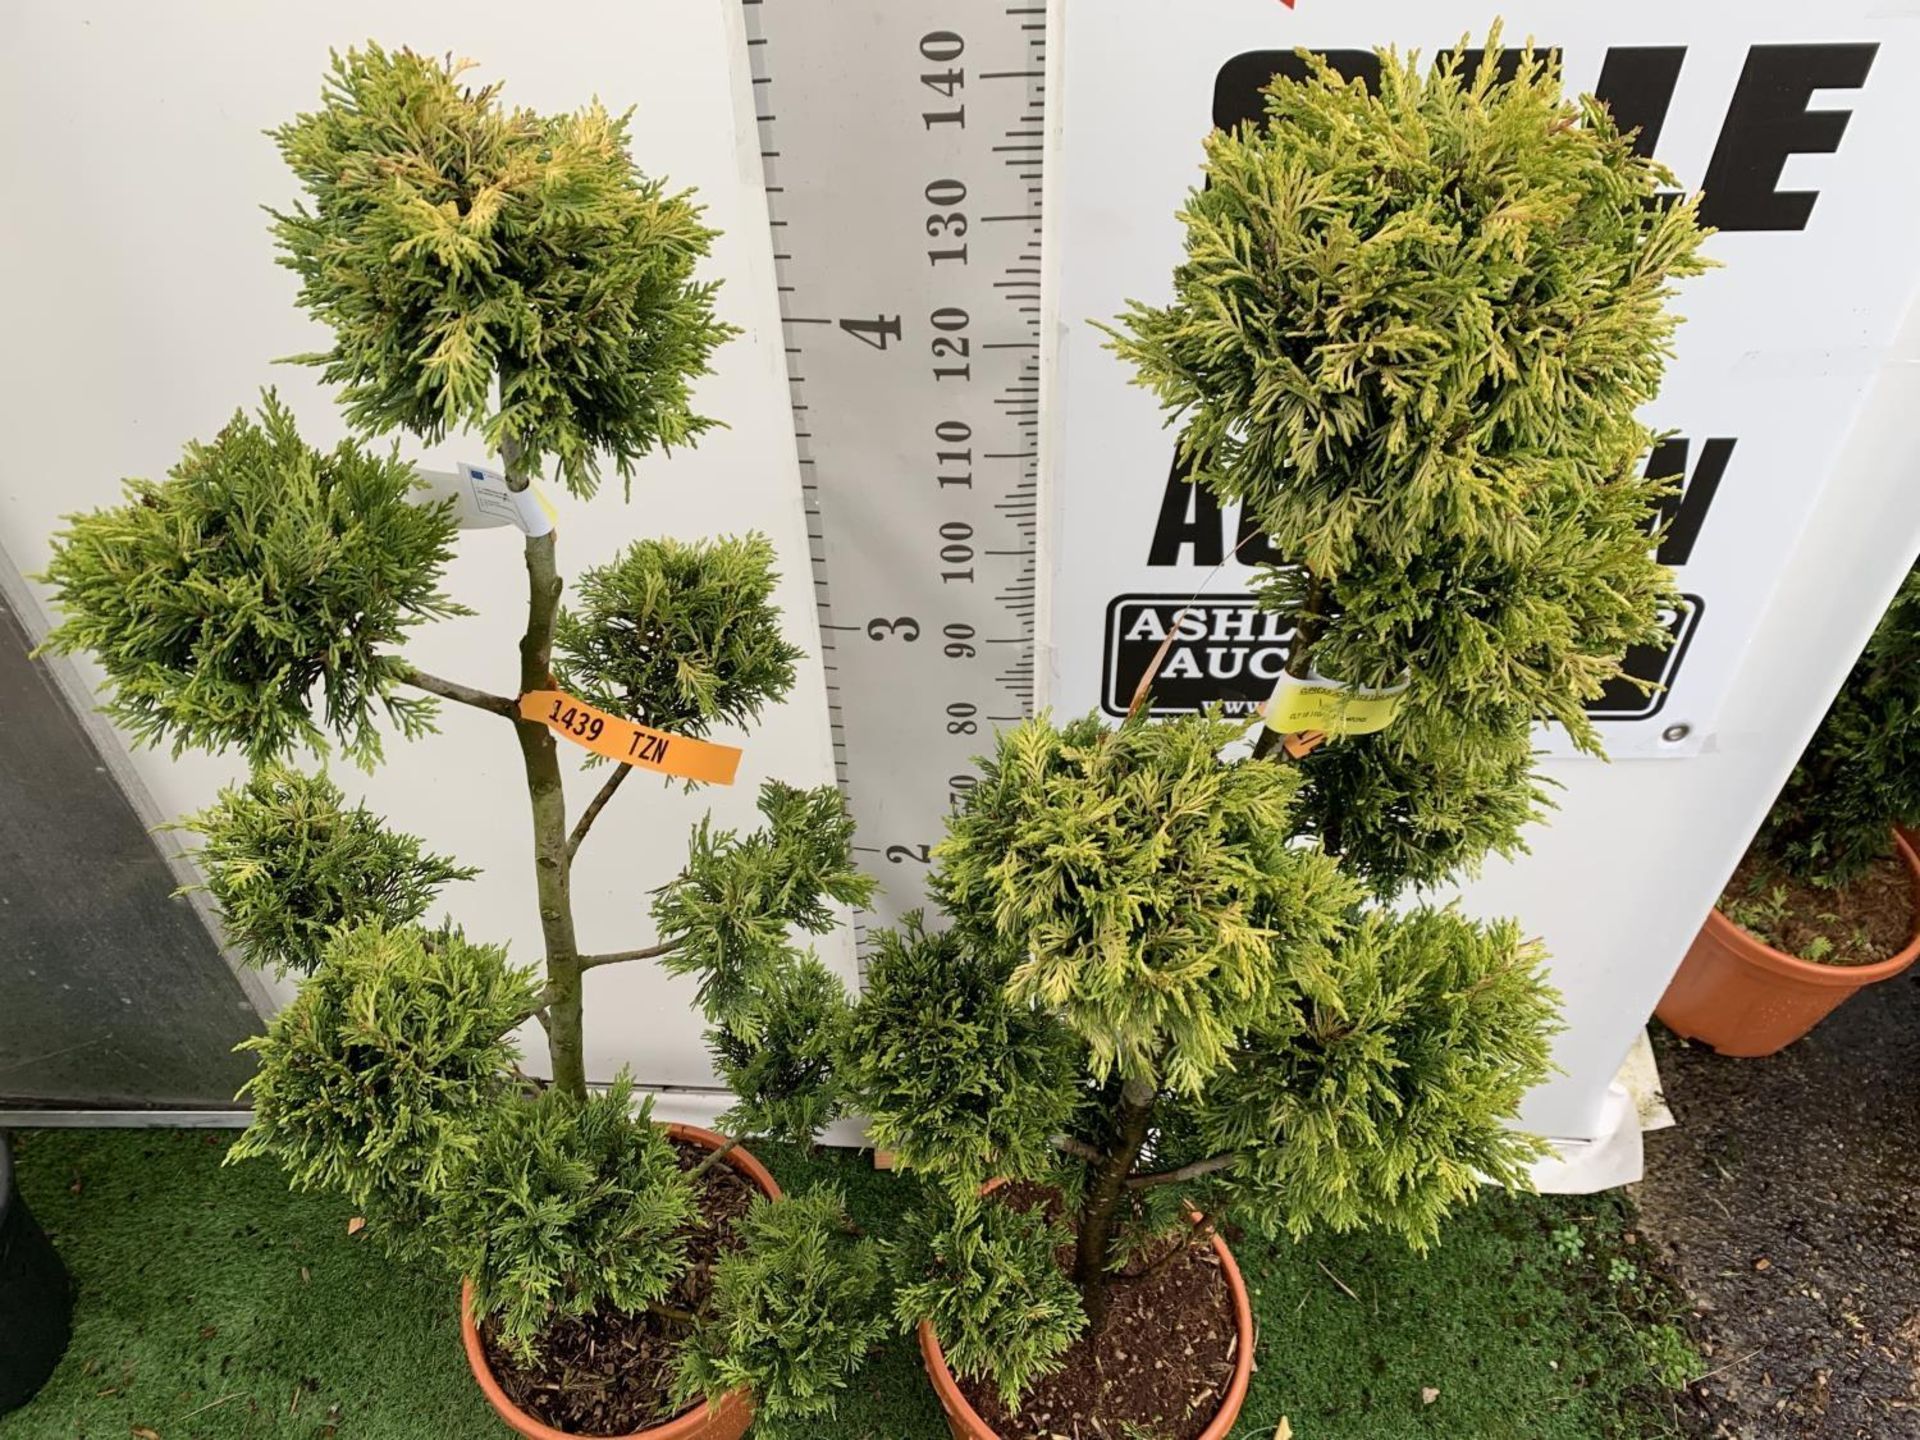 TWO POM POM TREES CUPRESSOCYPARIS LEYLANDII 'GOLD RIDER' APPROX 160CM IN HEIGHT IN 15 LTR POTS - Image 6 of 10